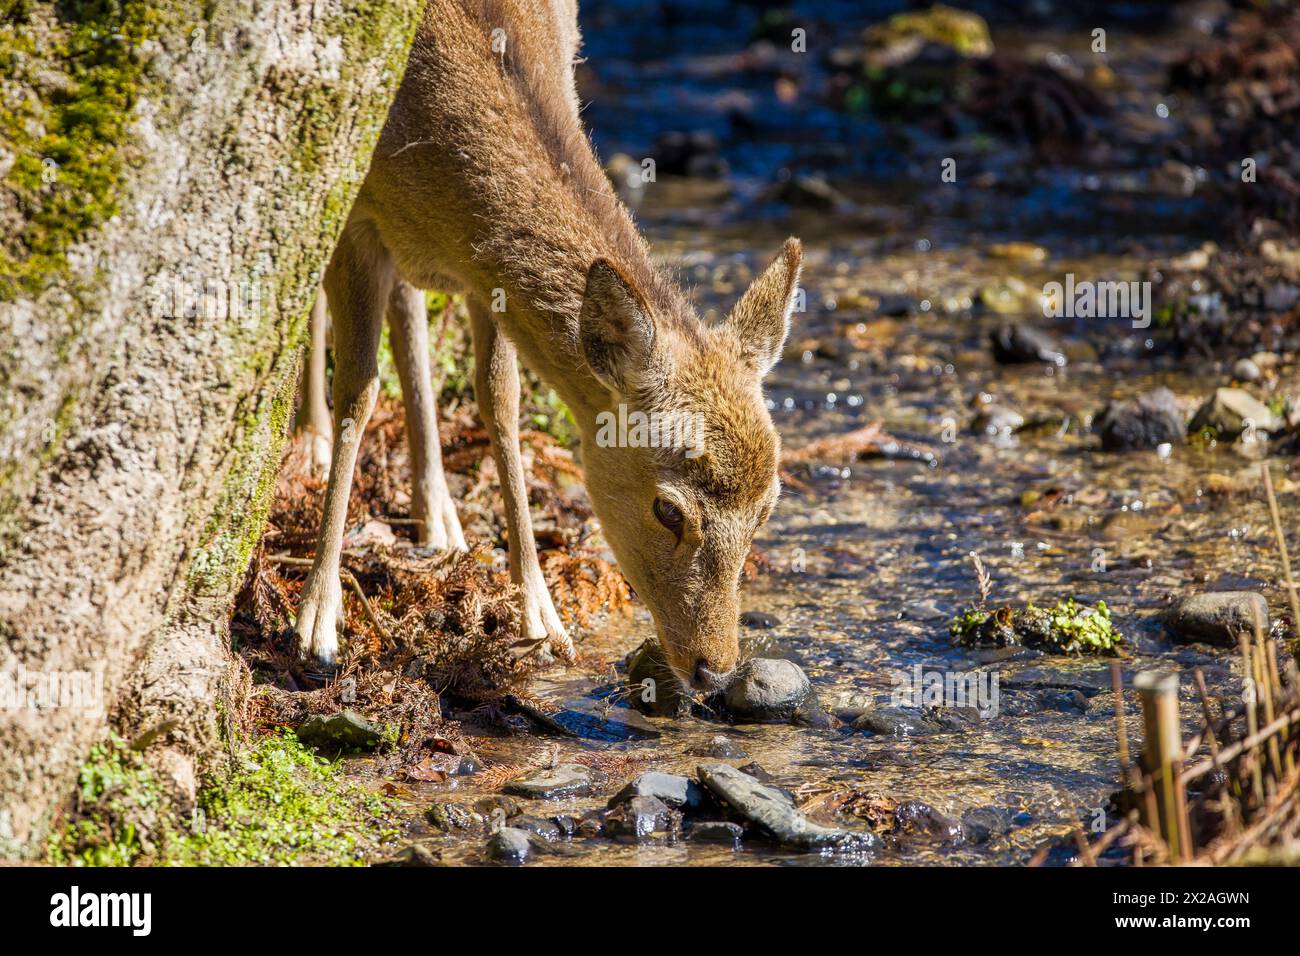 a drinking sika deer in nara by a small stream Stock Photo